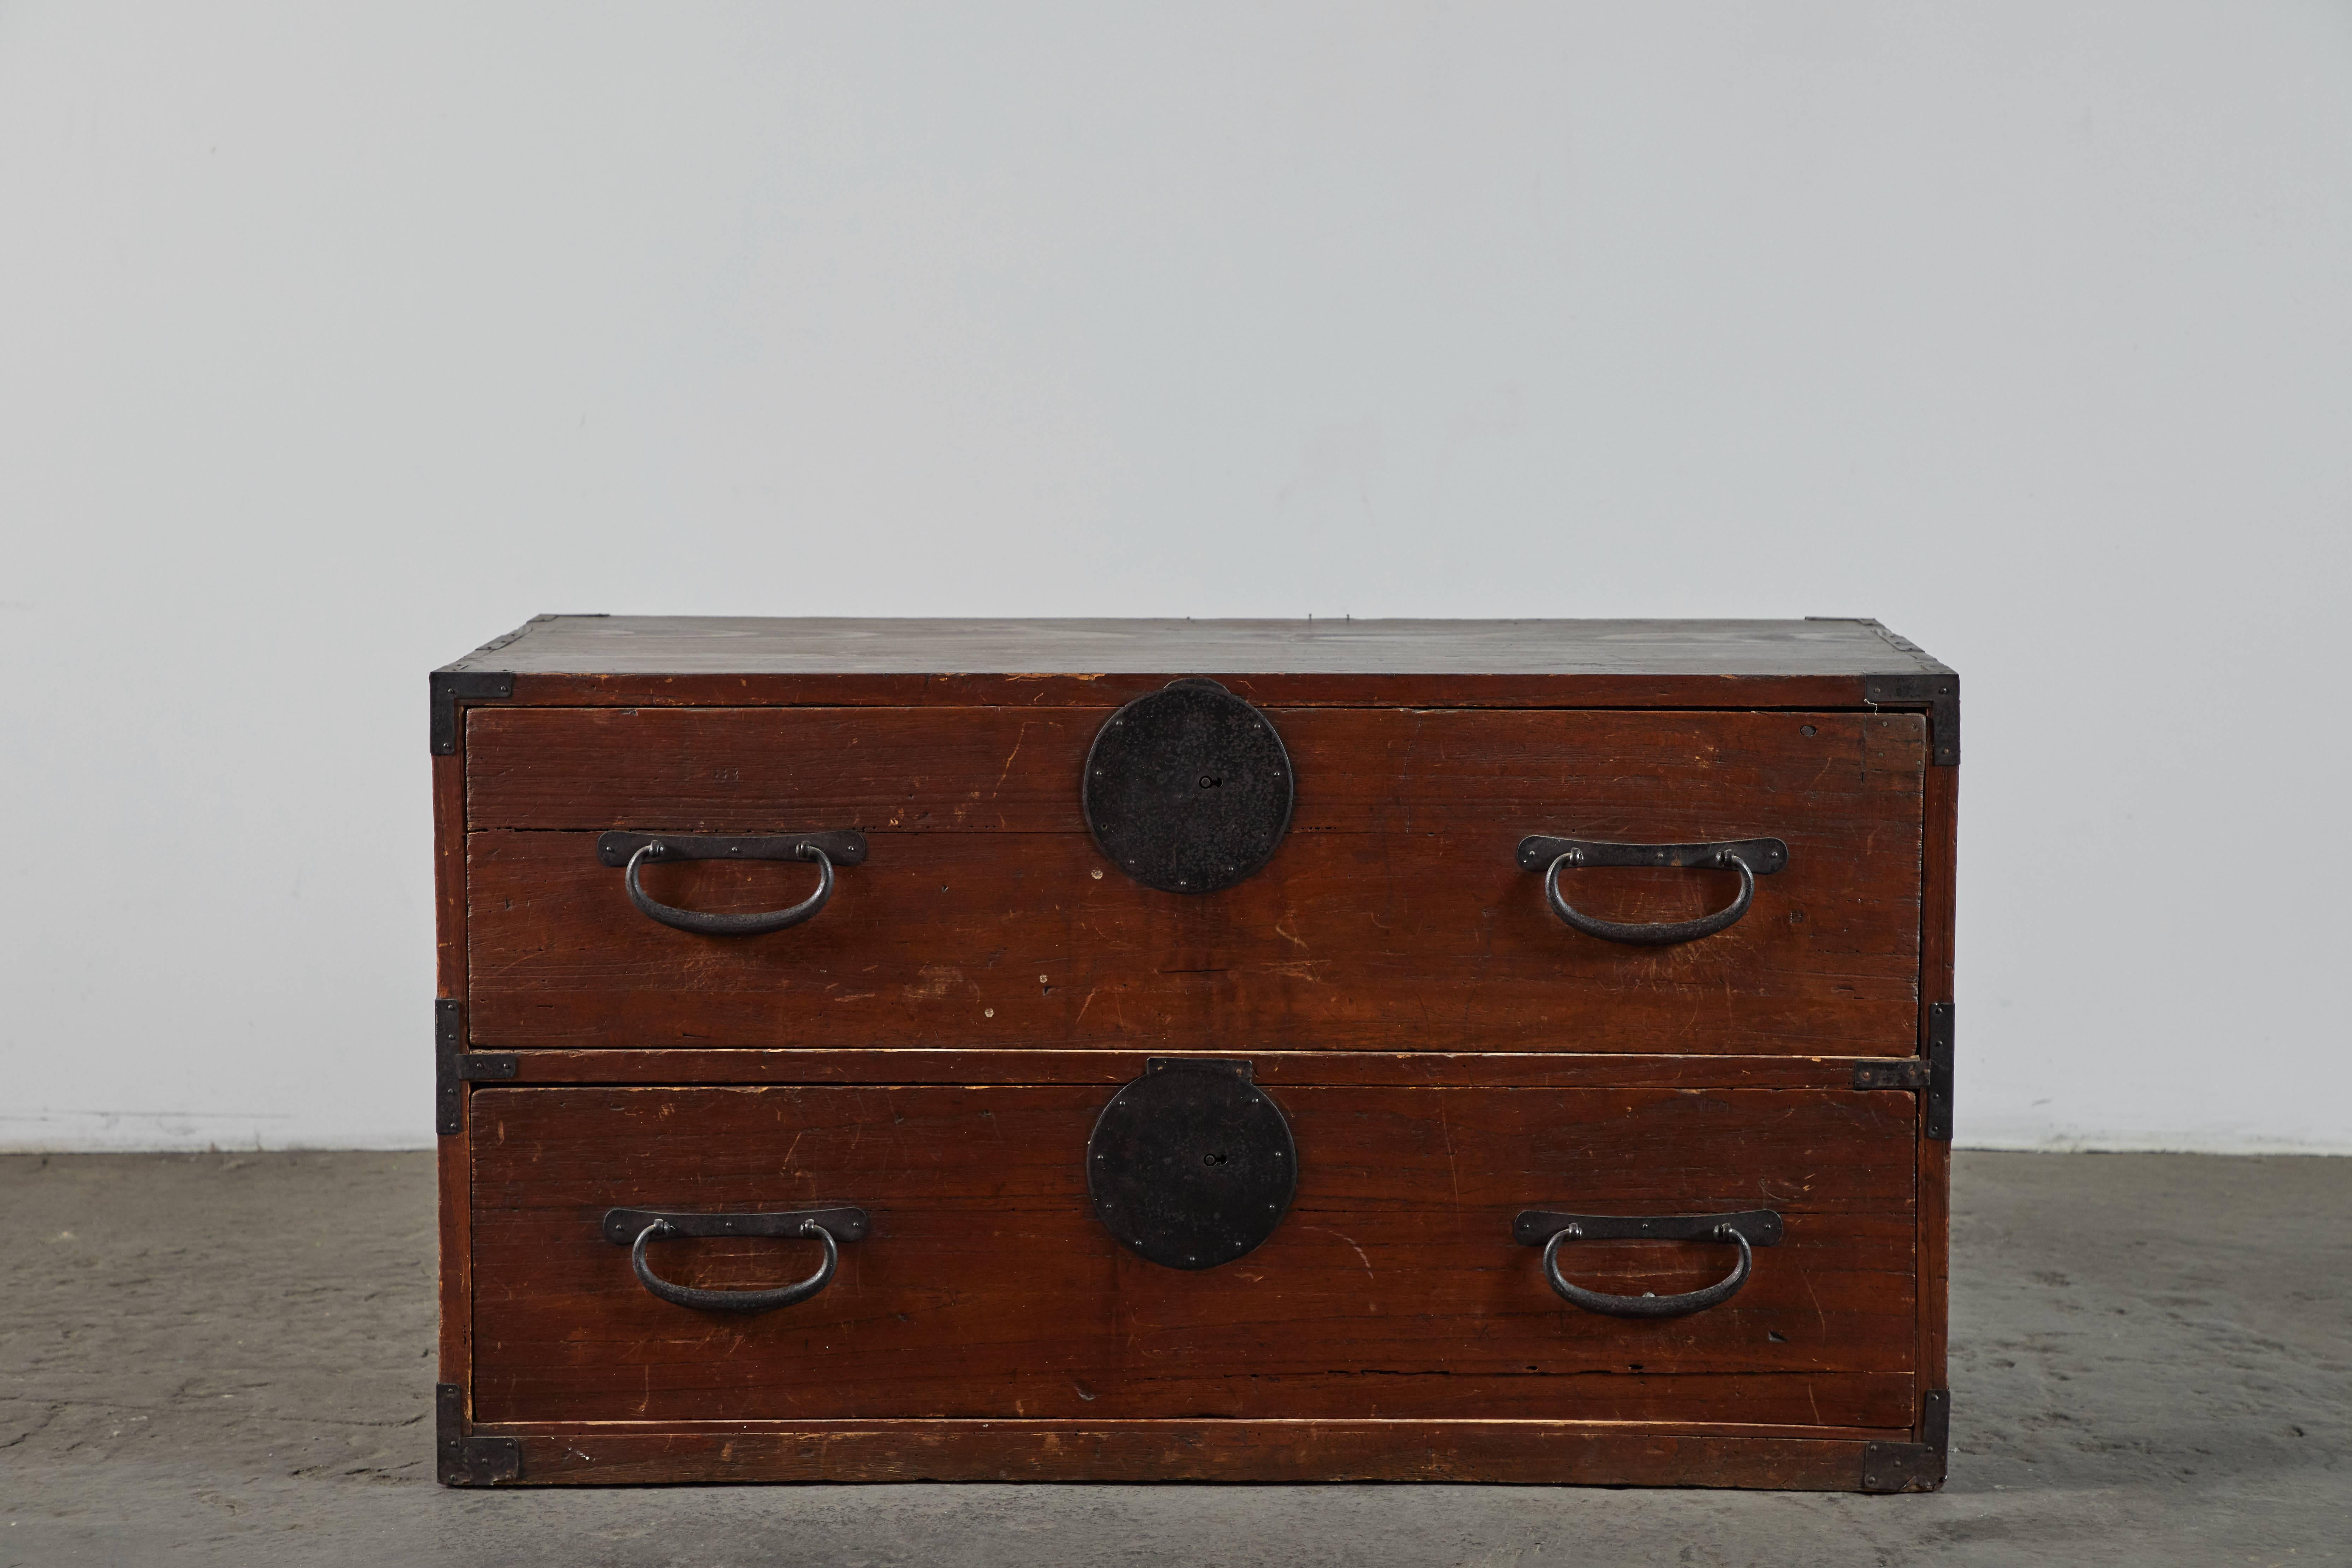 Japanese wood Tansu chest of drawers with original iron hardware. Made in Japan circa 1870s.